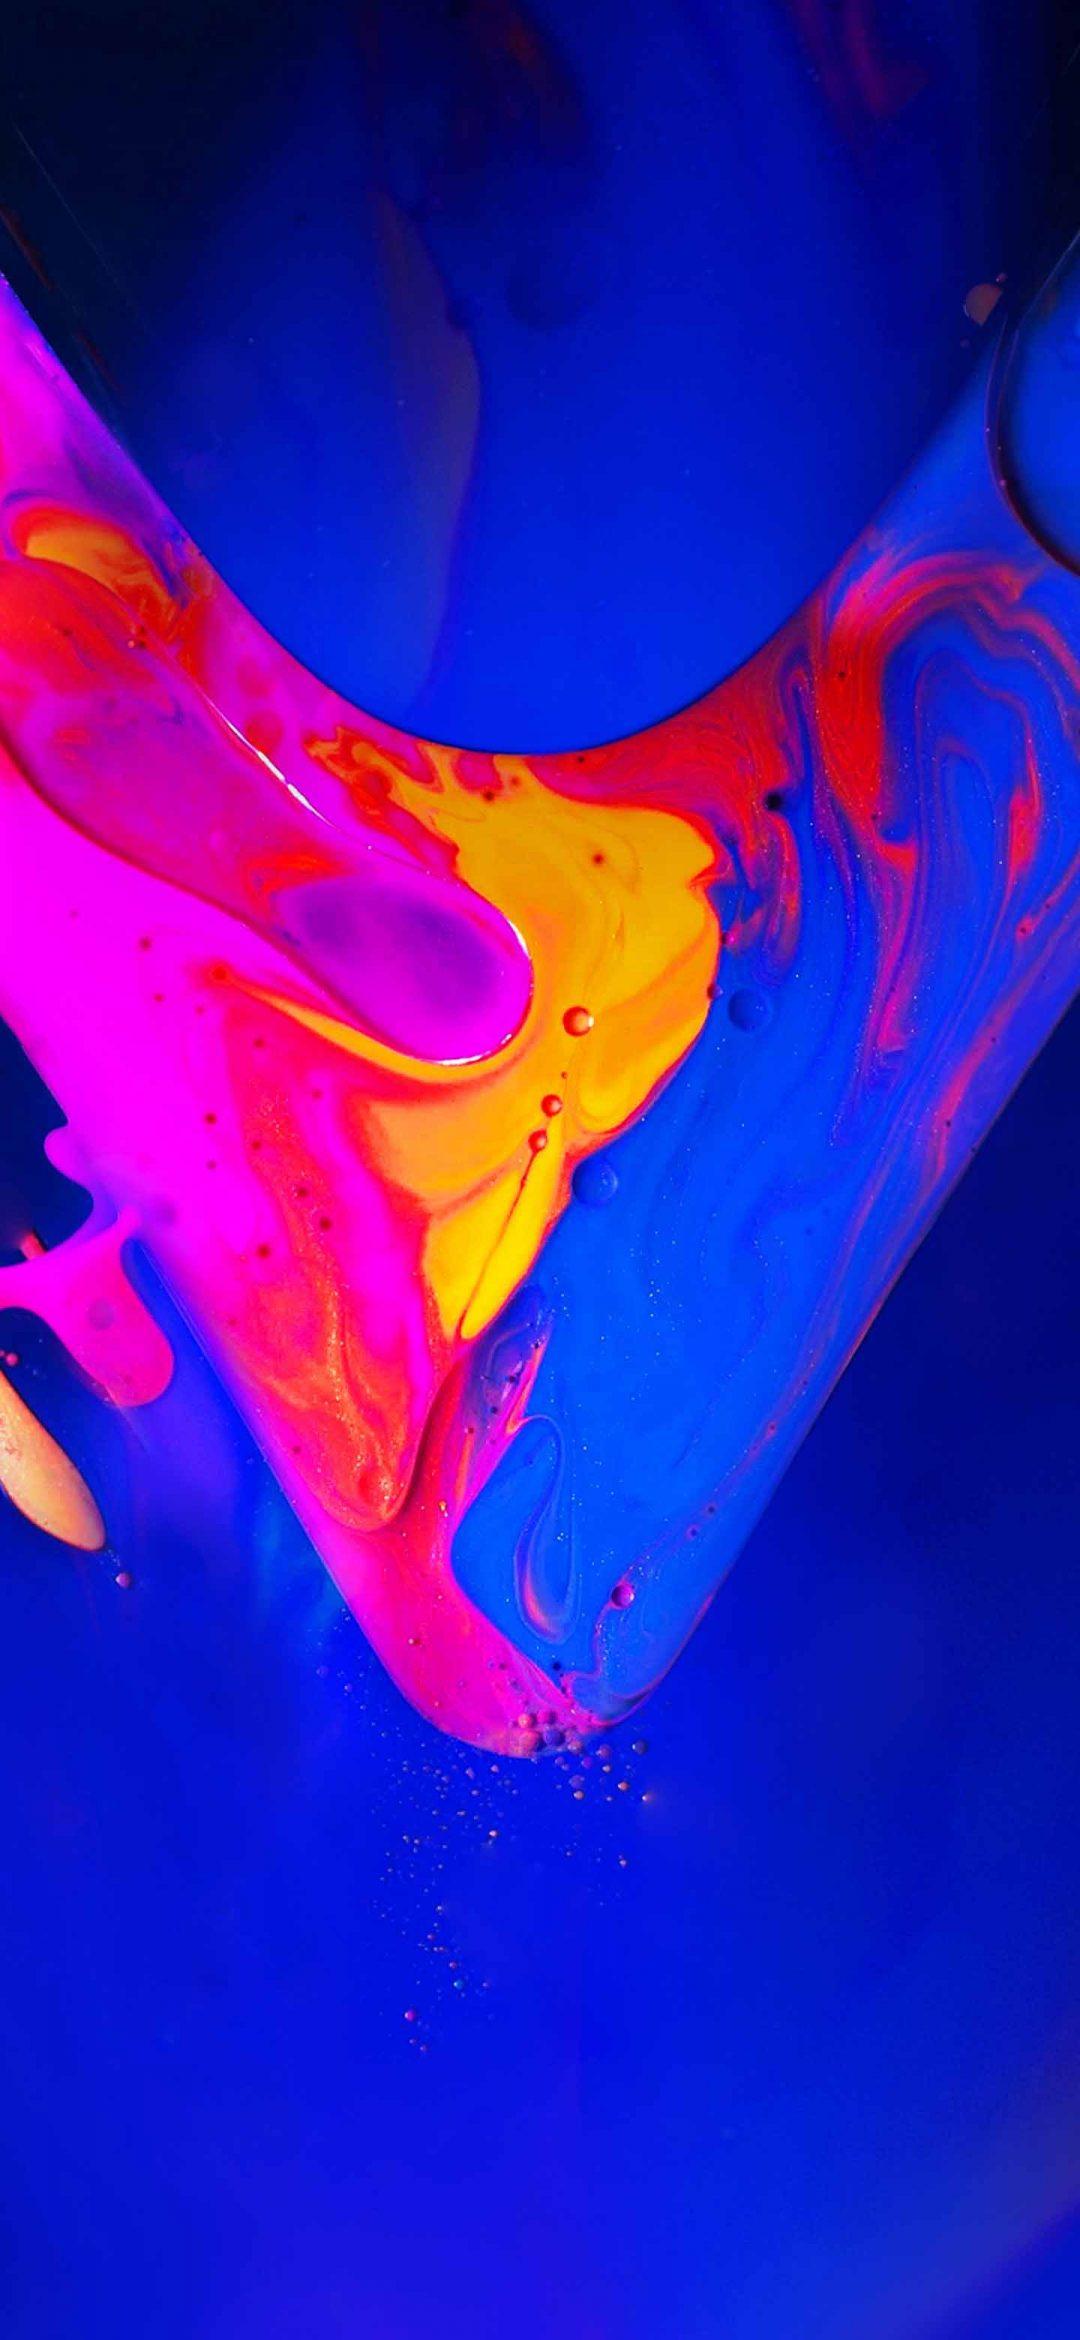 LG G8 ThinQ Wallpaper. Live Wallpaper. System Apps